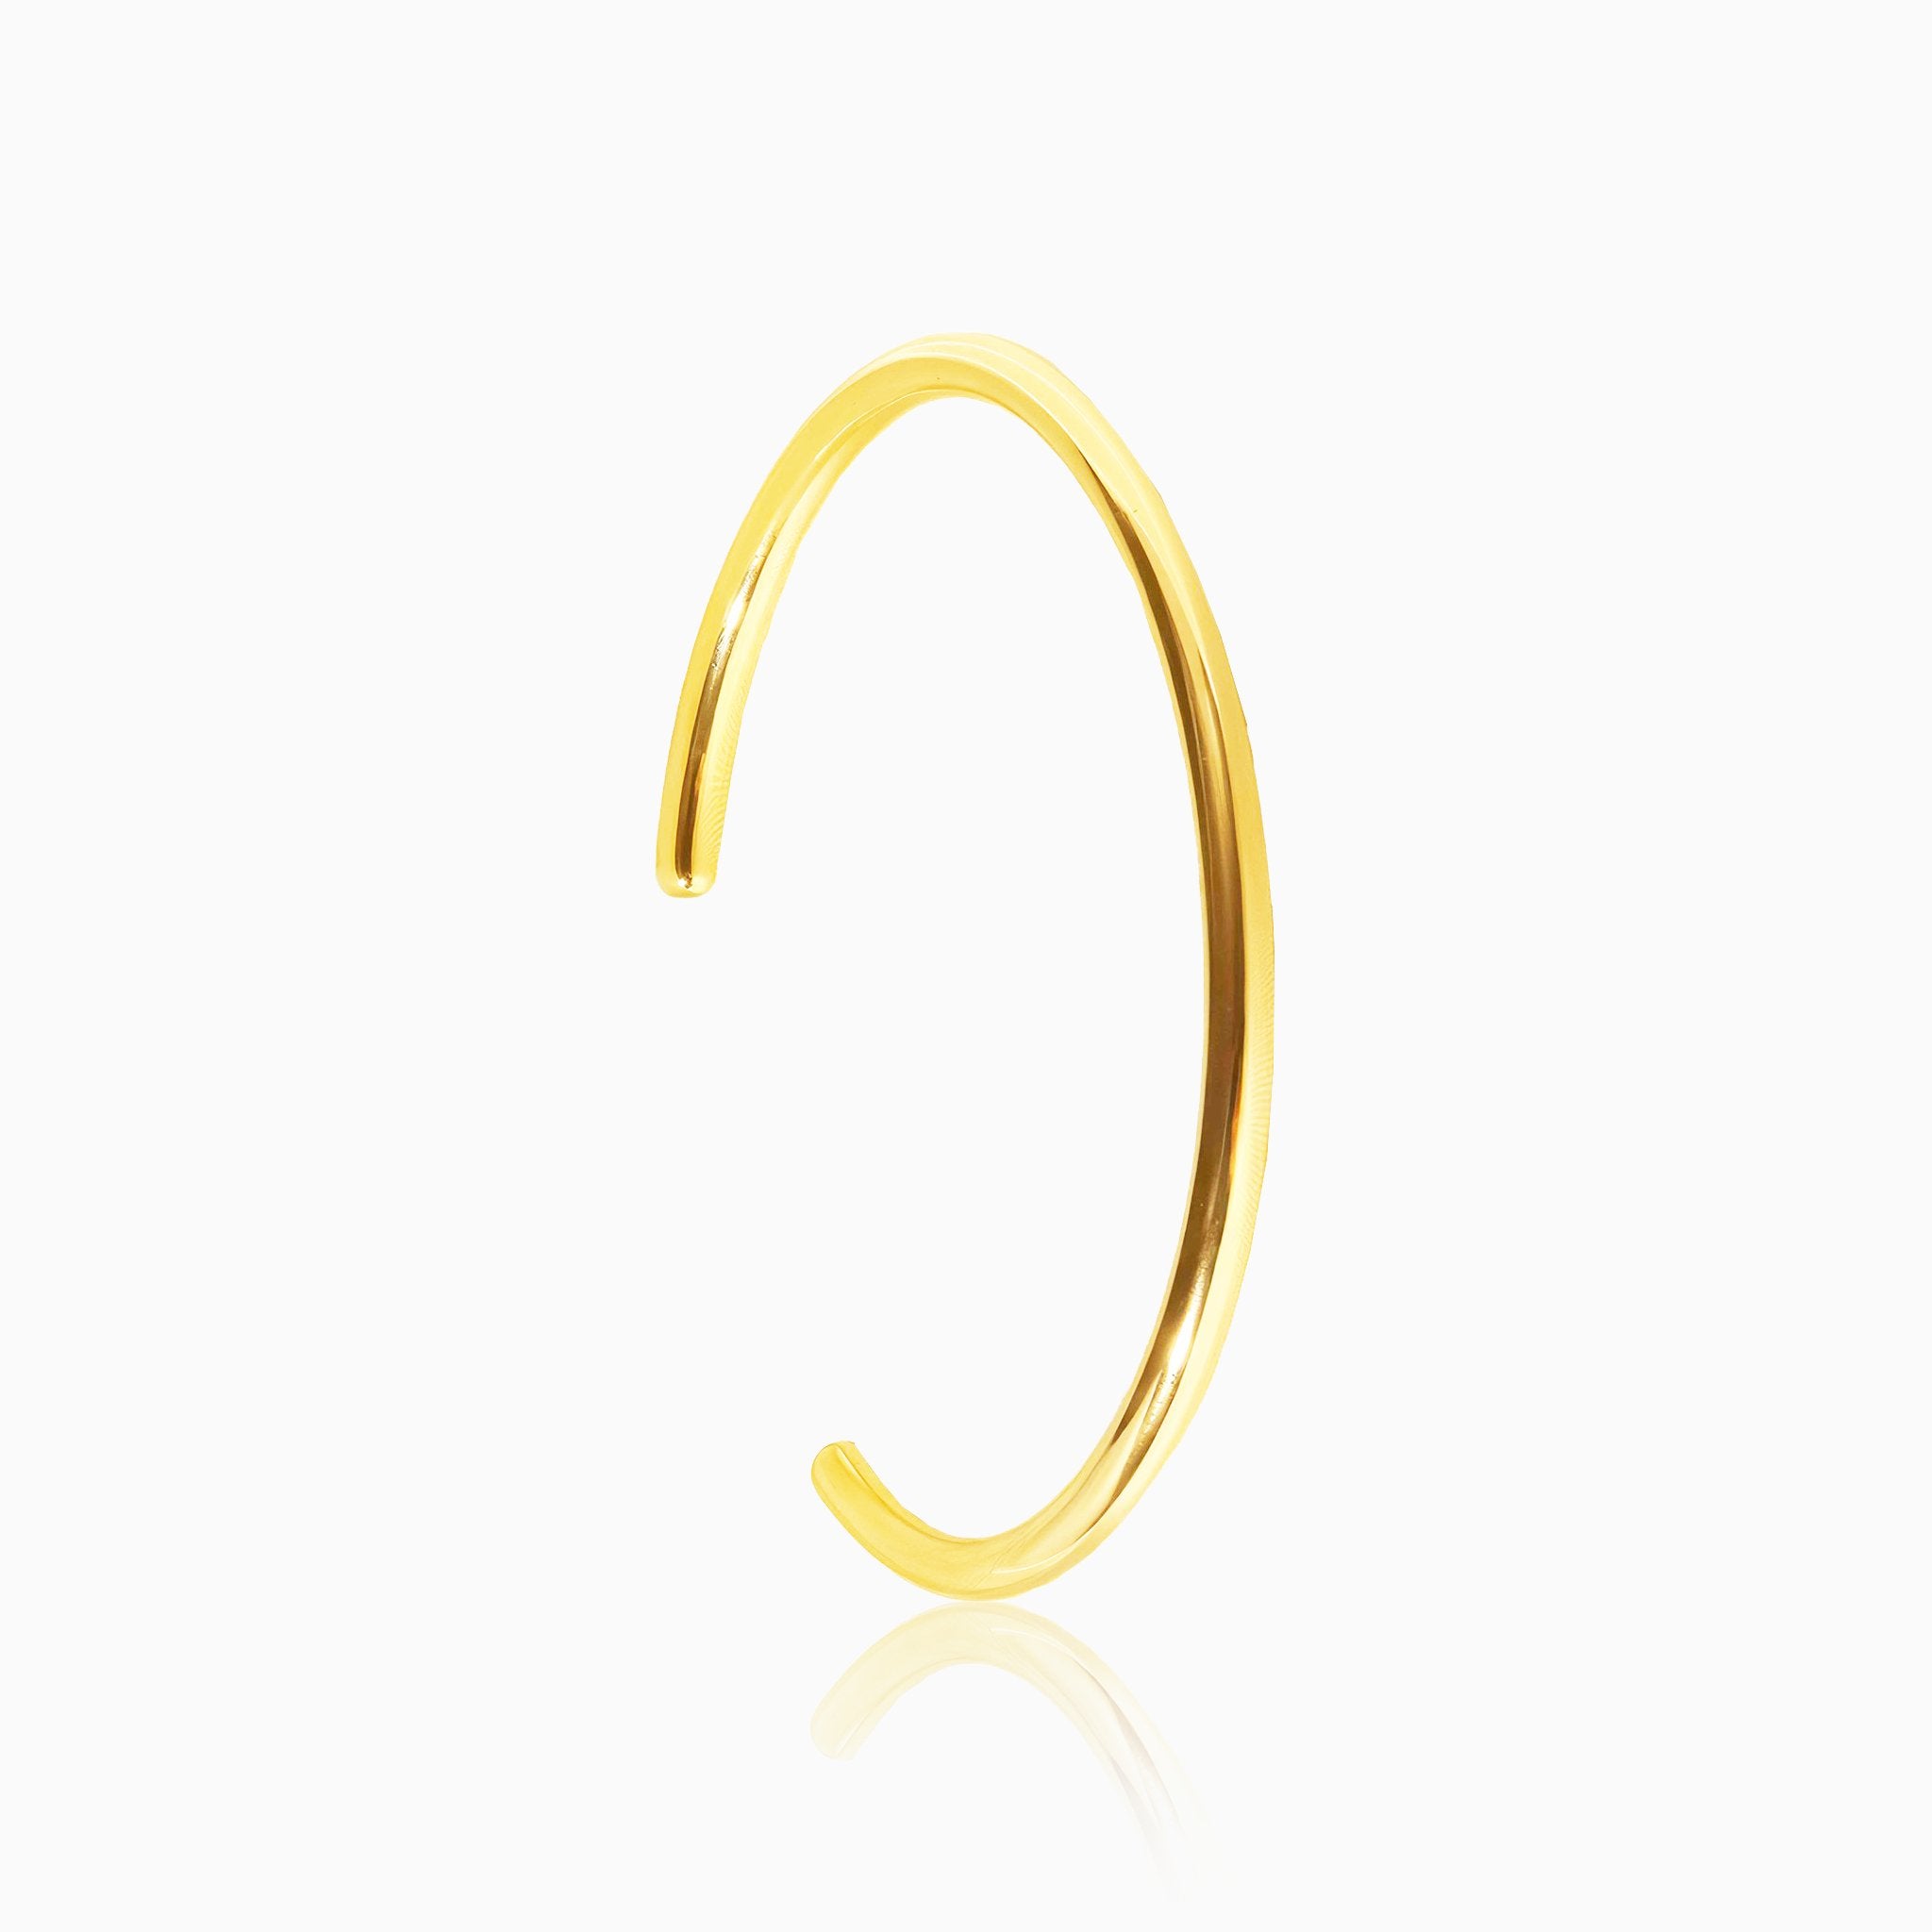 Open Design Bangle - Nobbier - Bangle - 18K Gold And Titanium PVD Coated Jewelry